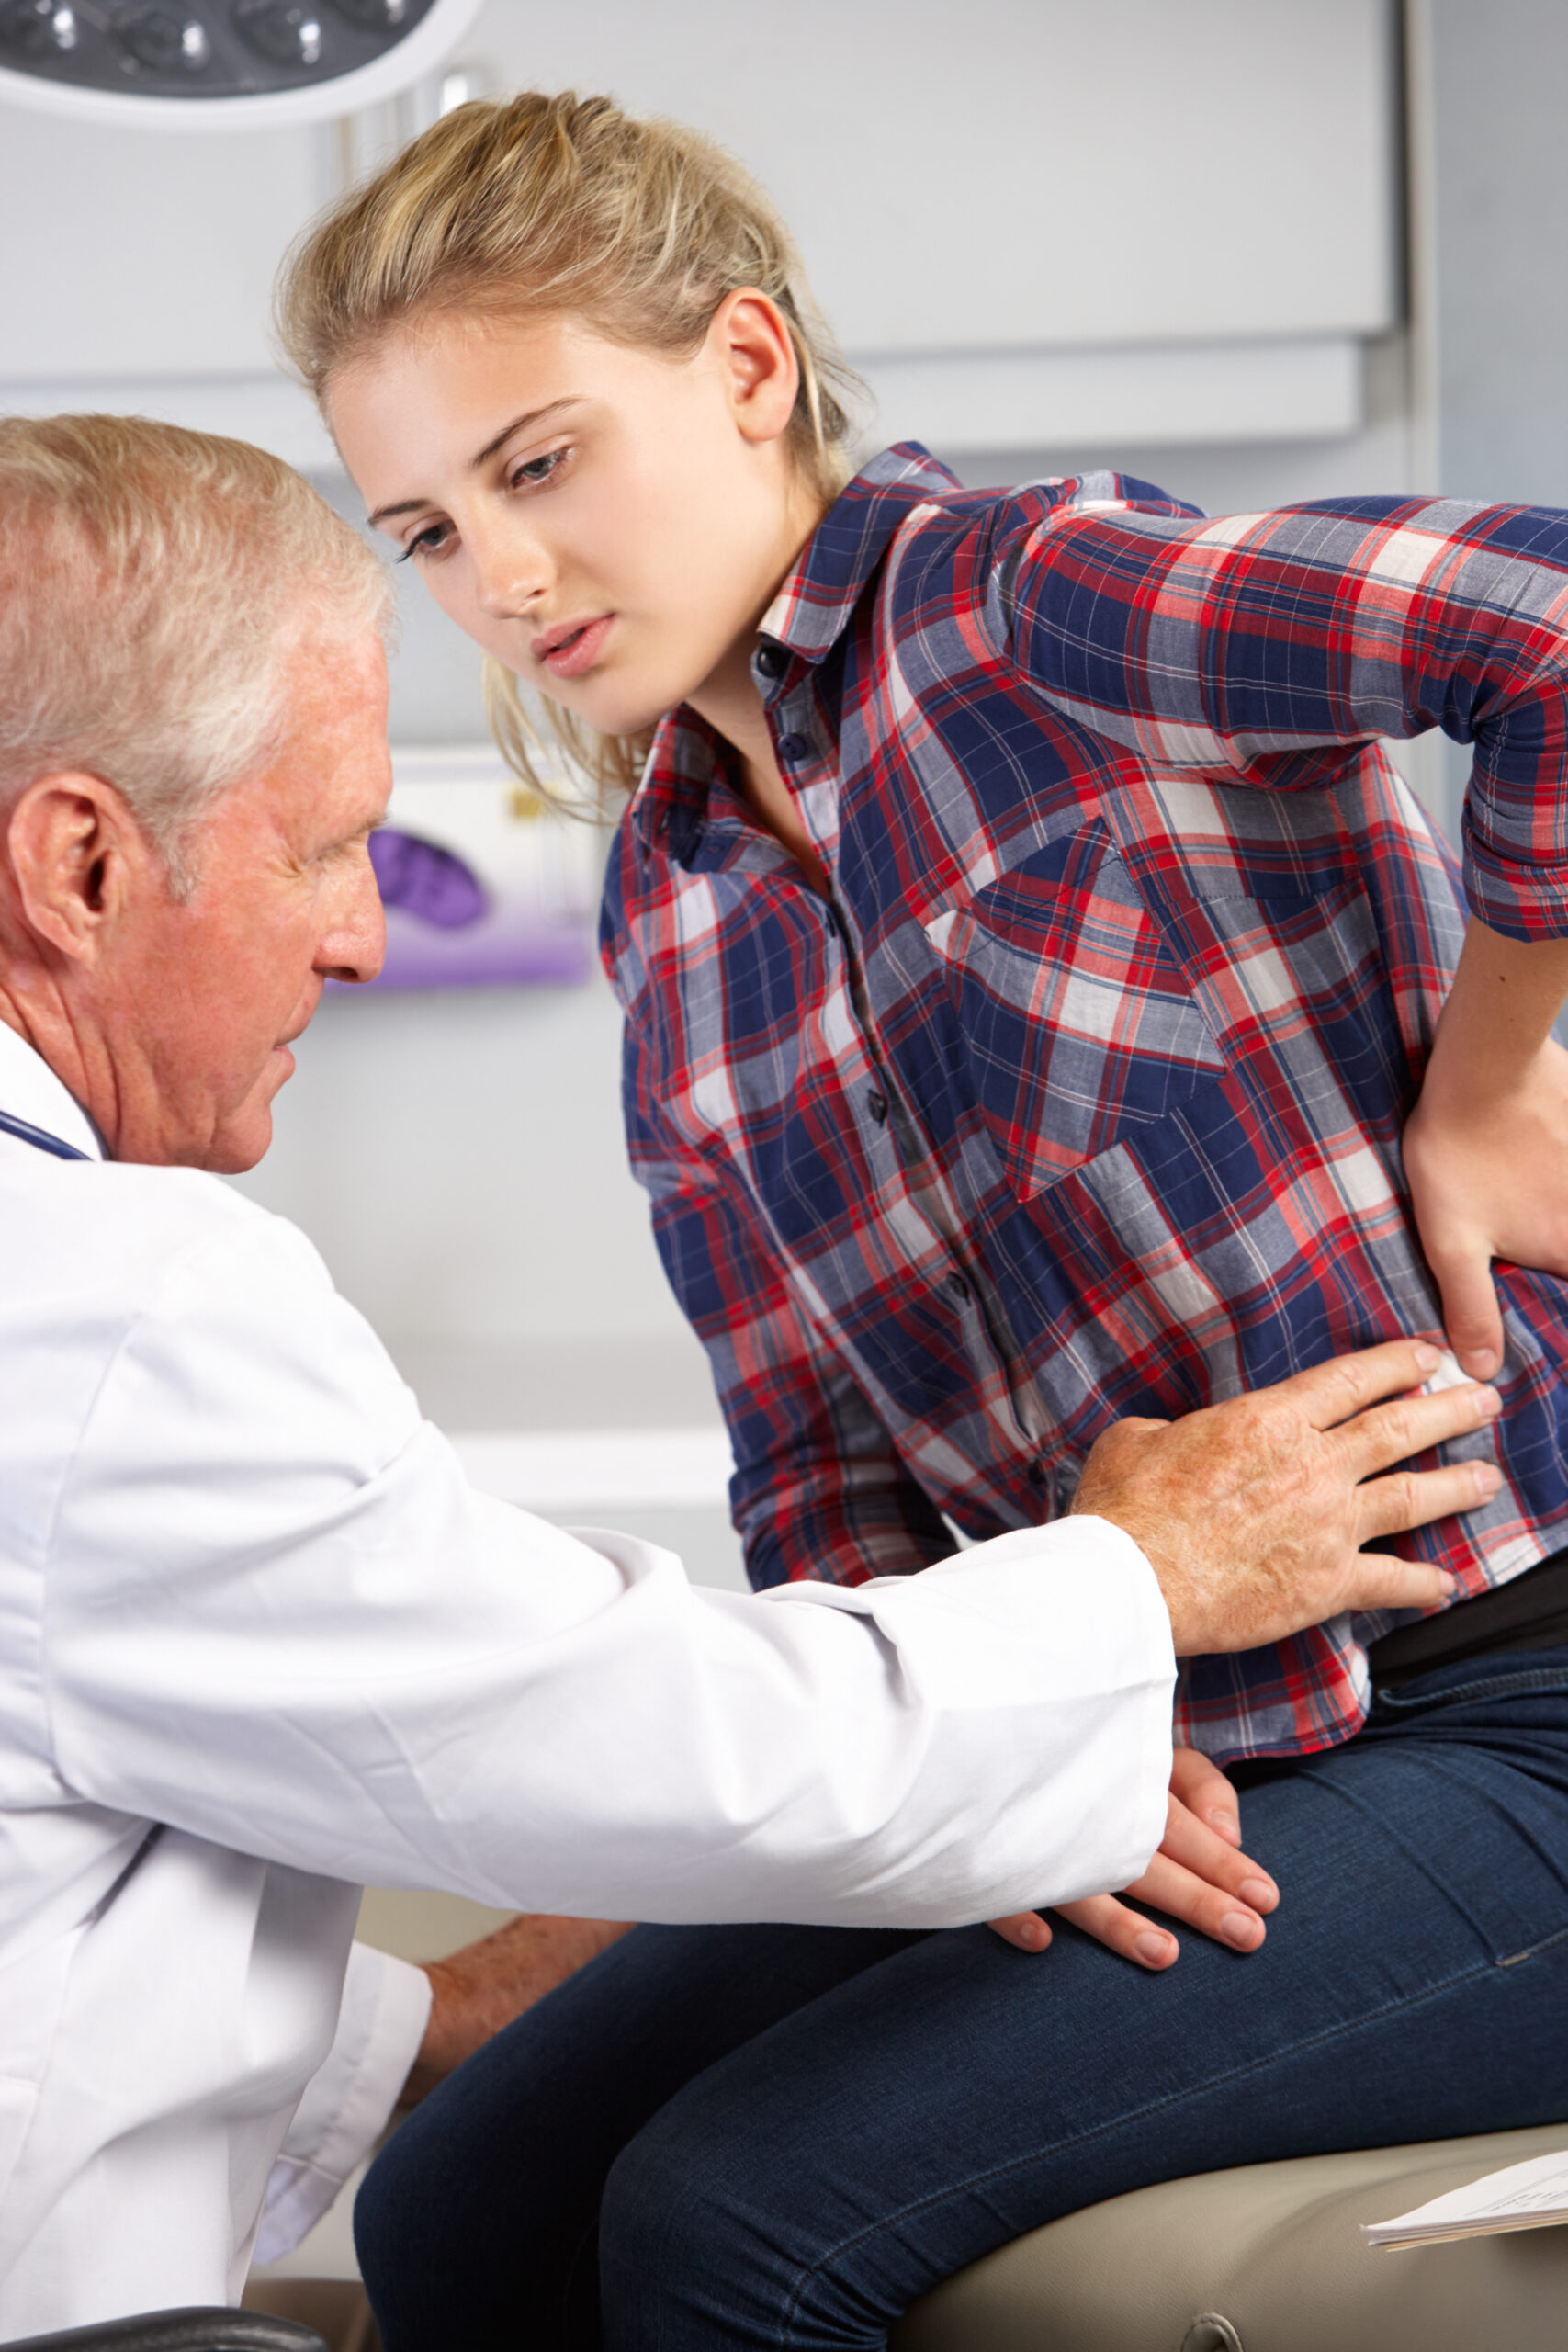 How Chiropractic Can Help Your Low Back Pain